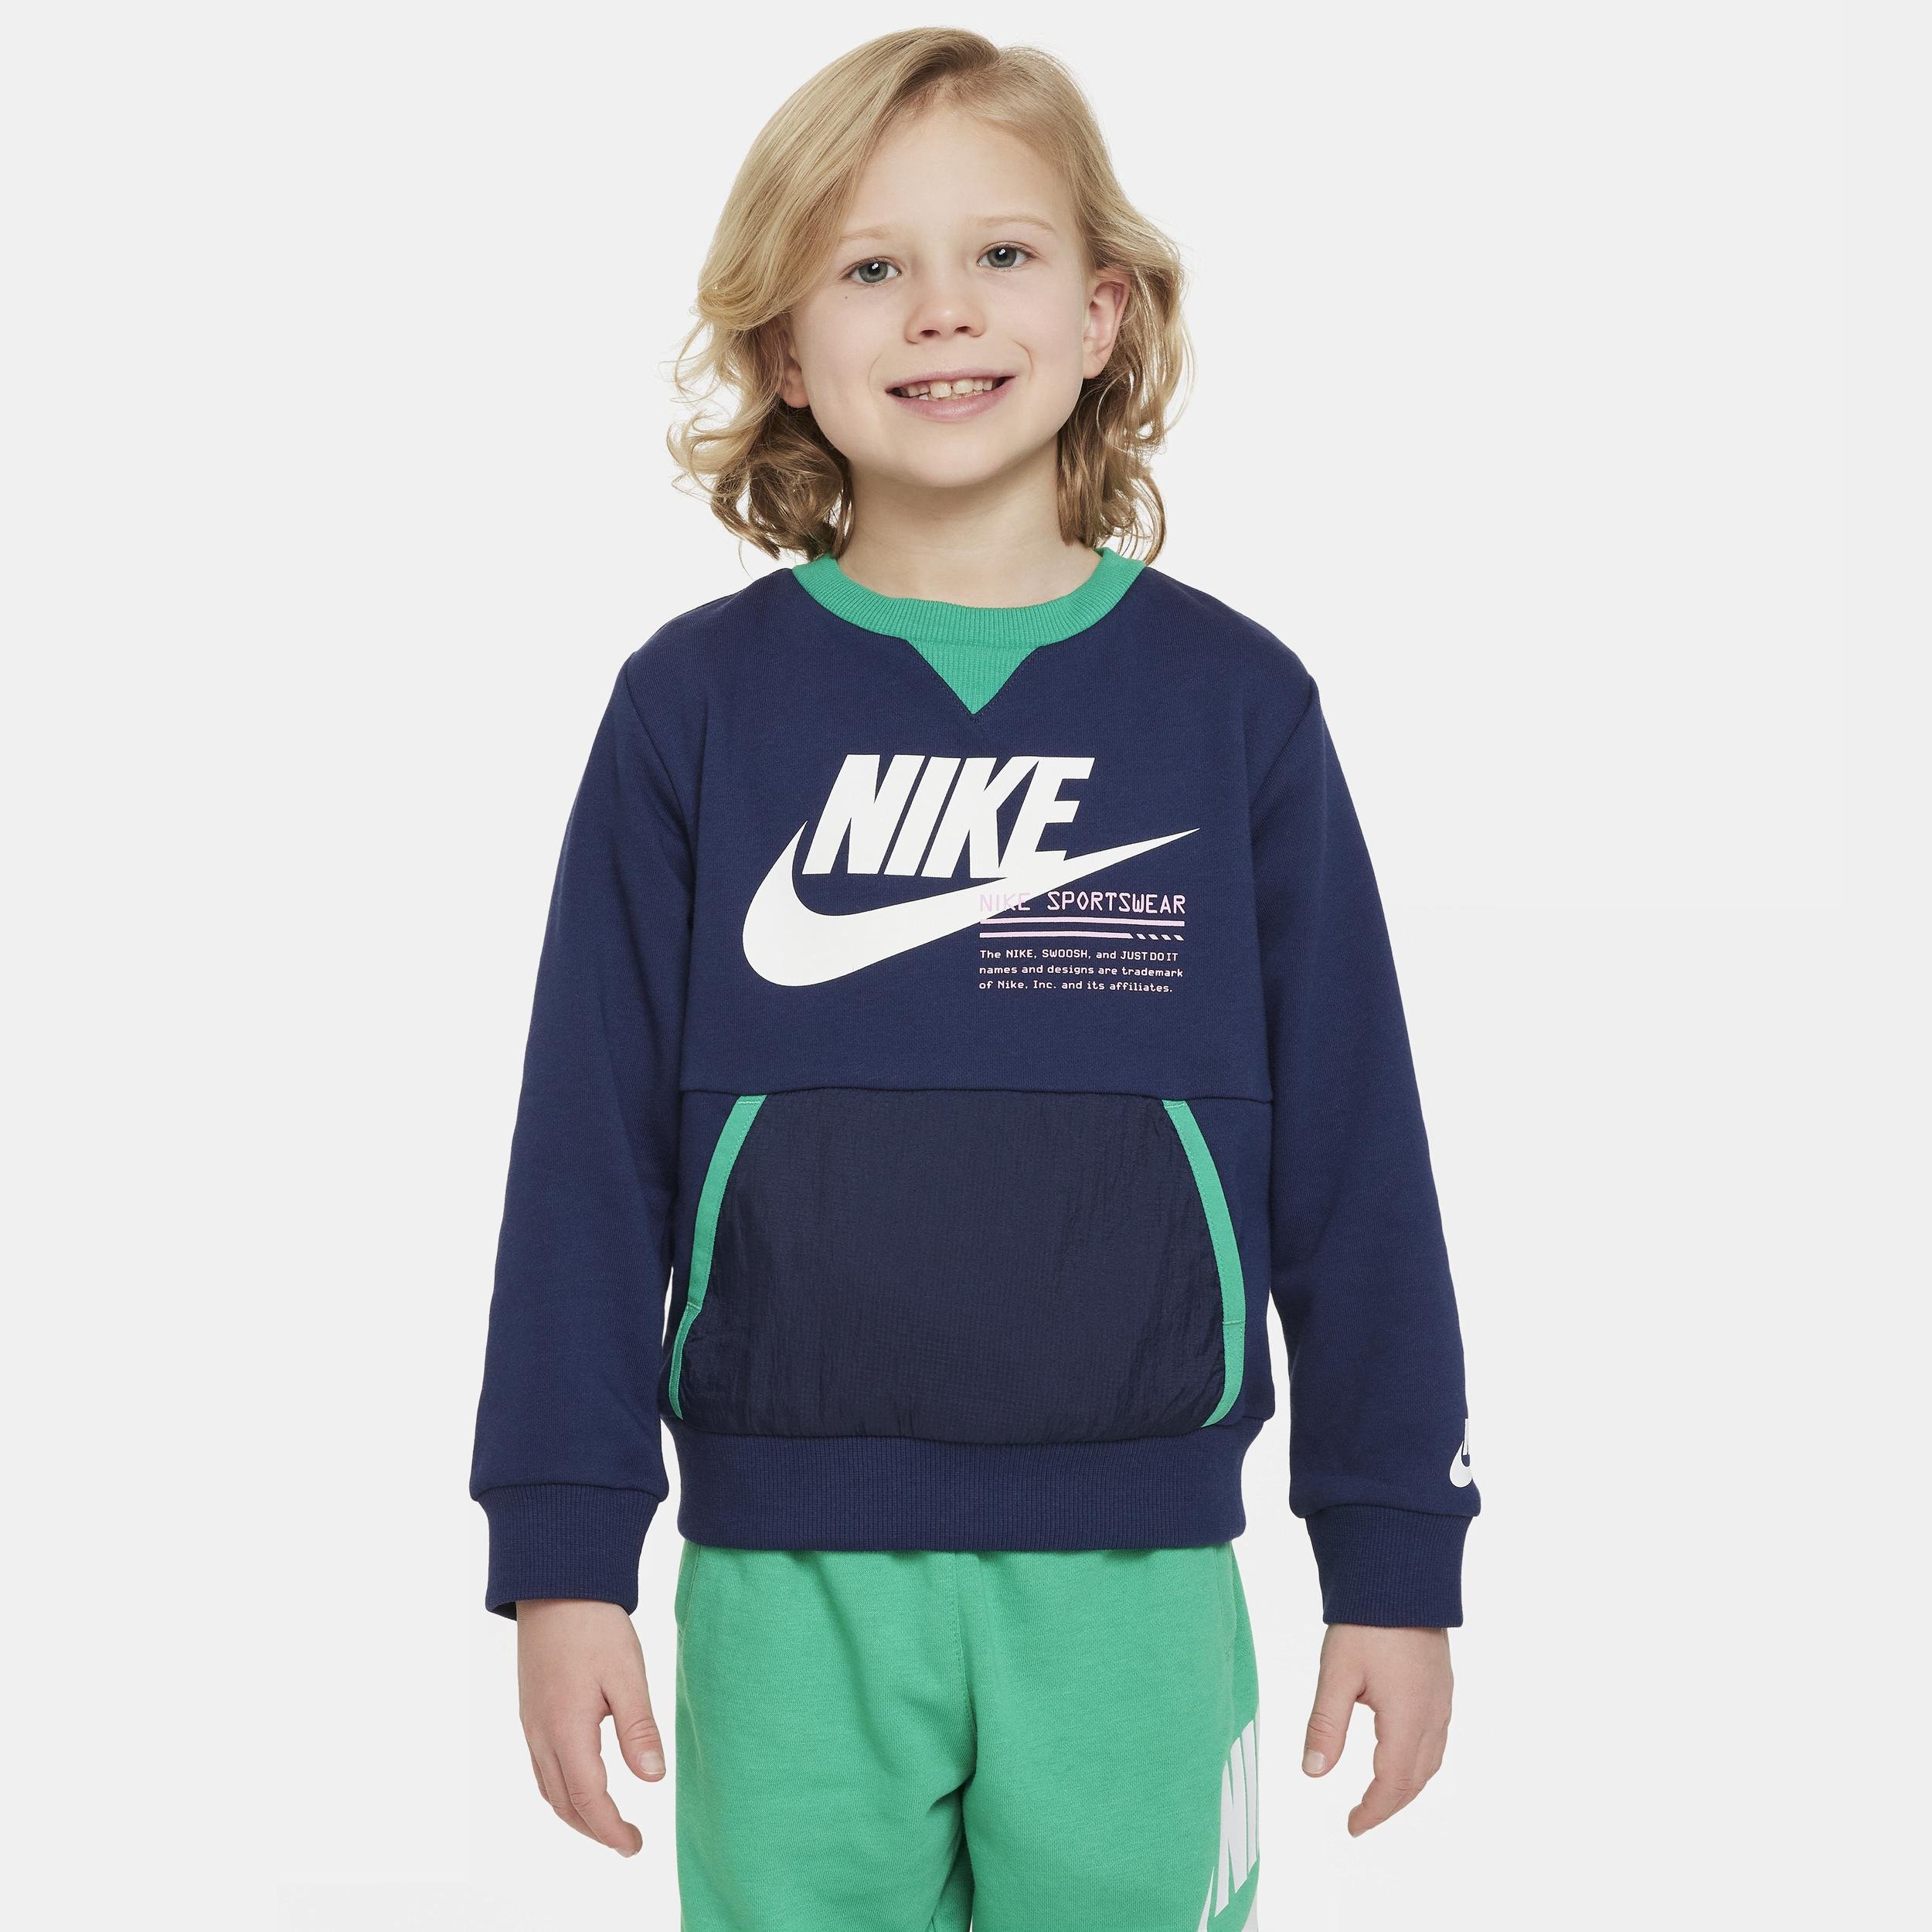 Nike Sportswear Paint Your Future Little Kids' French Terry Crew by NIKE